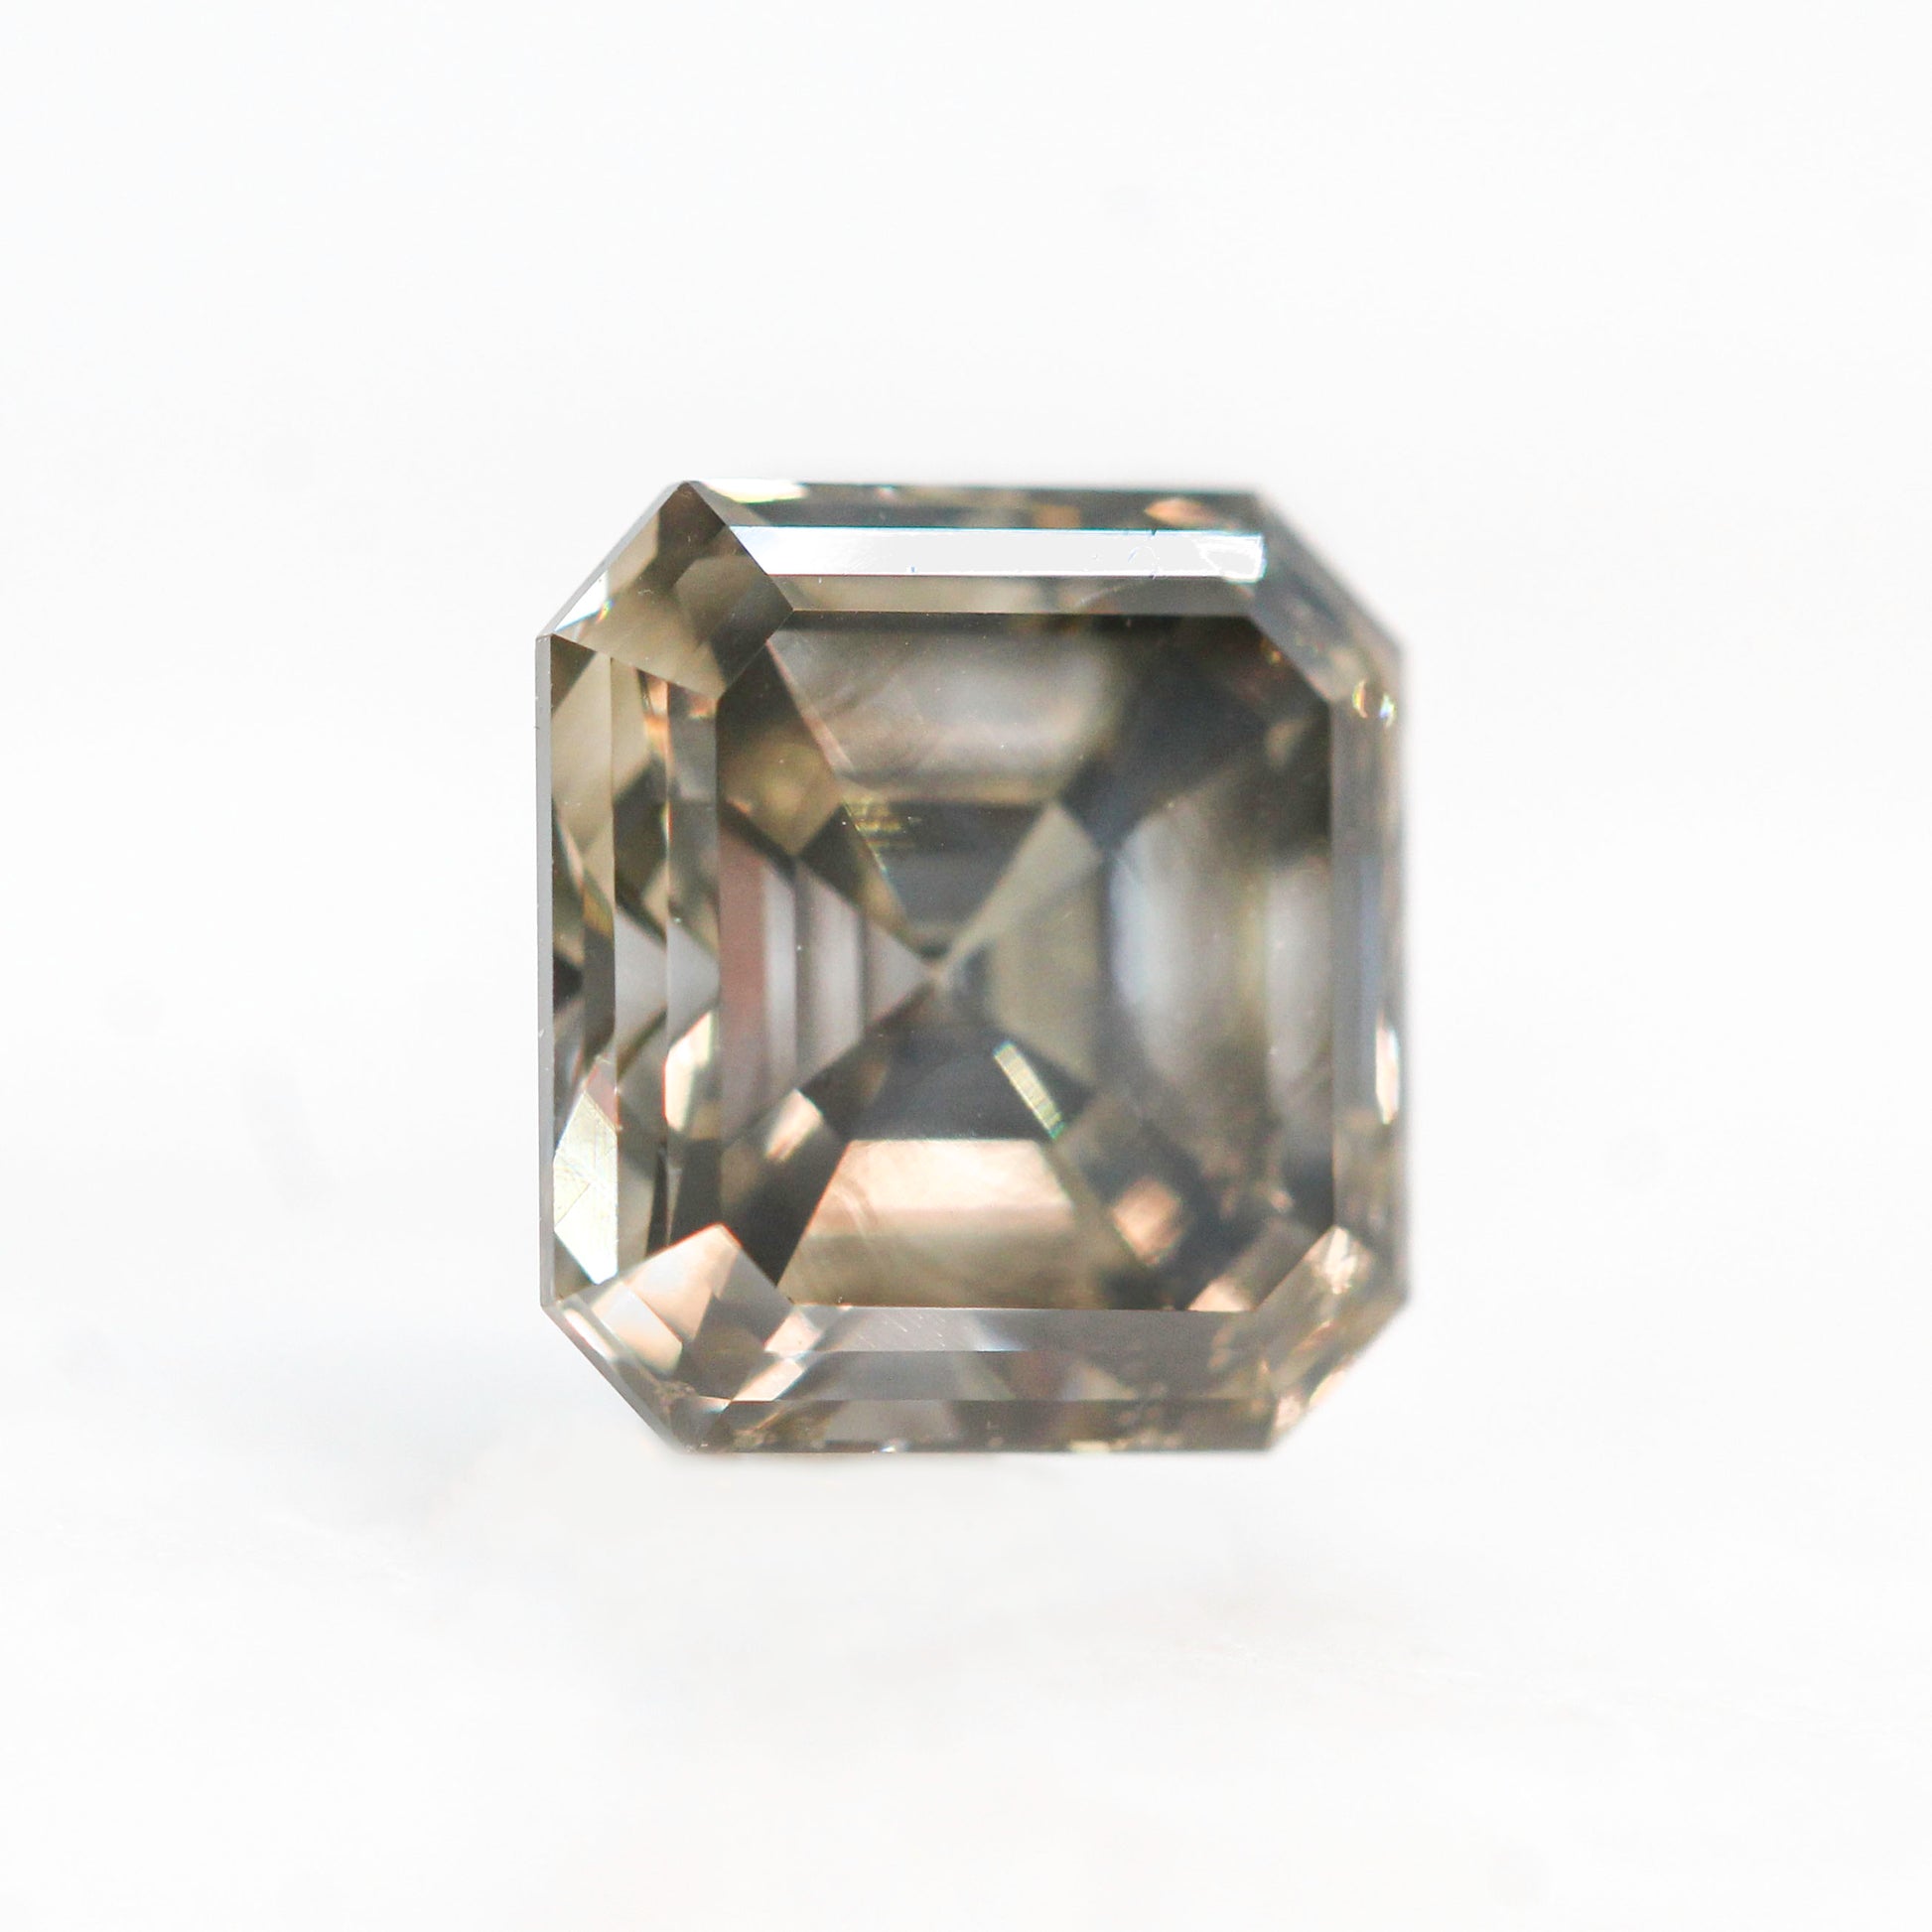 2.04 Carat Champagne Gray Asscher Cut Diamond for Custom Work - Inventory Code SCA204 - Midwinter Co. Alternative Bridal Rings and Modern Fine Jewelry